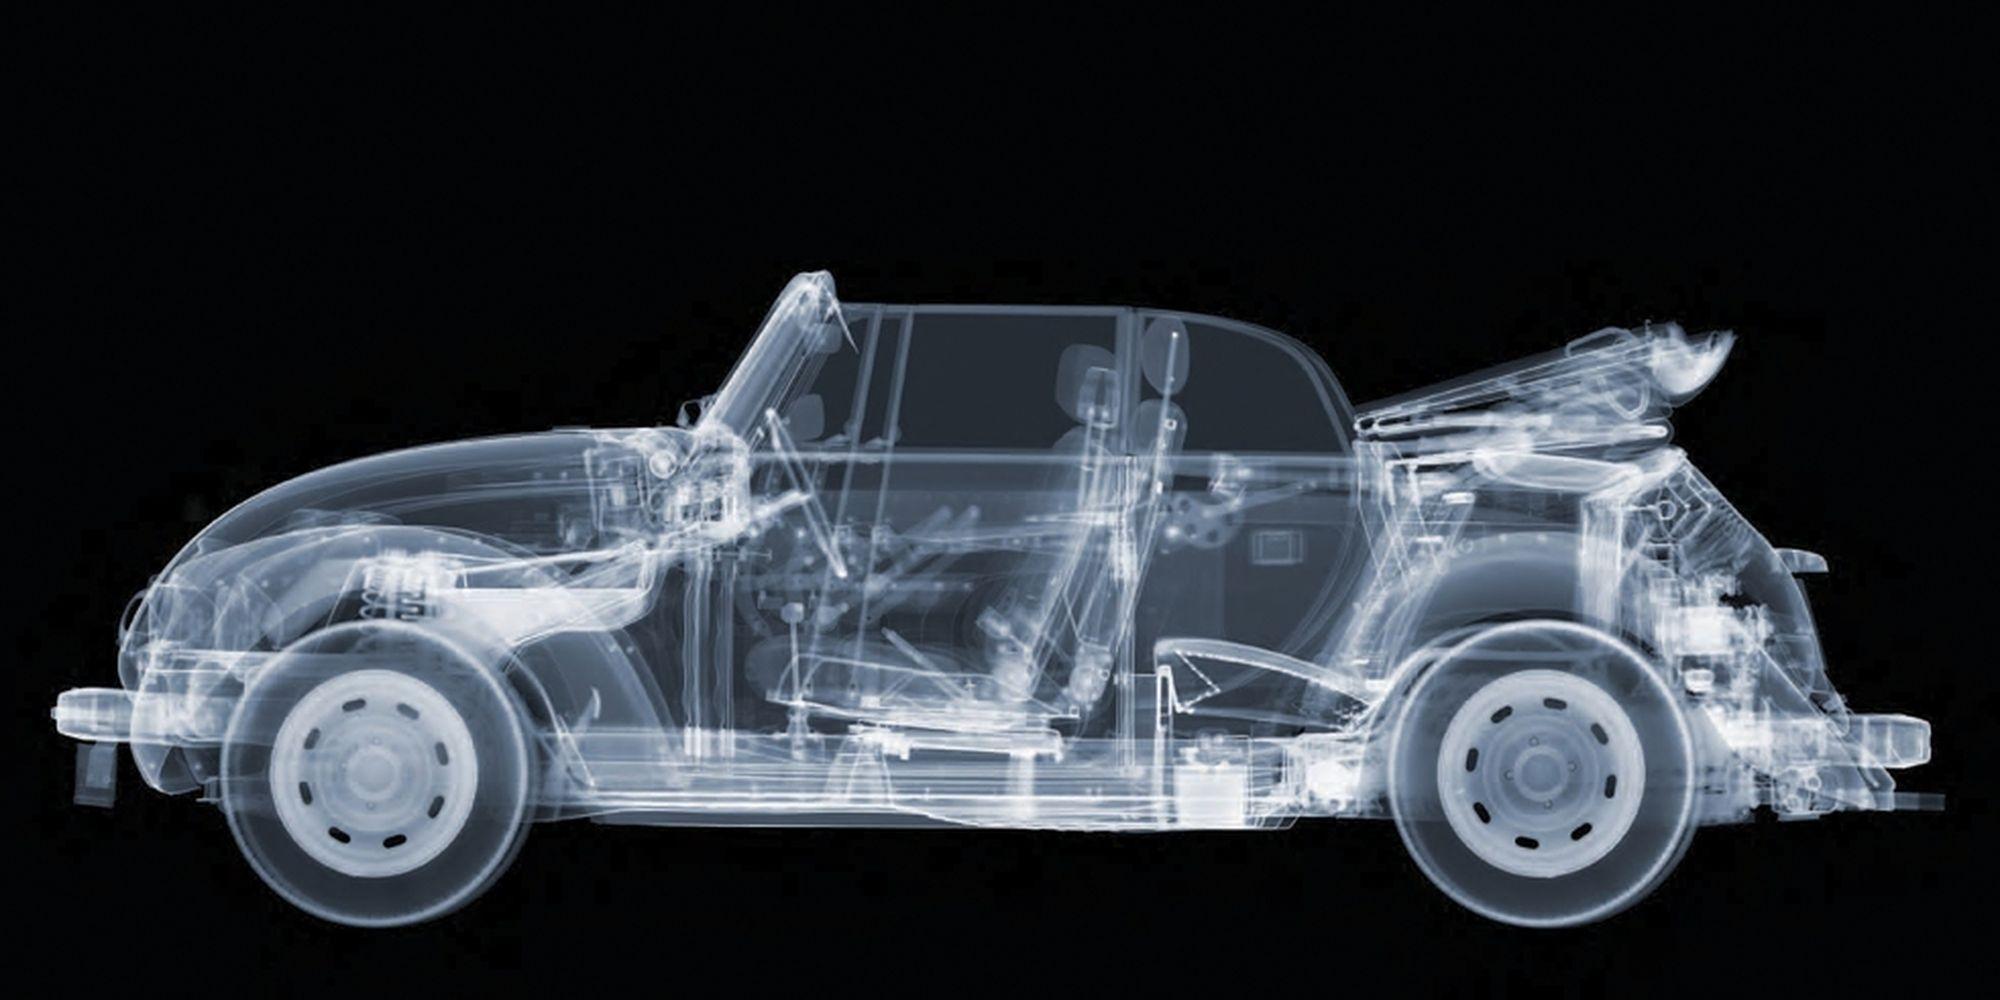 "VW Cabriolet"
21 x 42.5 inches 
X-Ray C-Type print with Diasec frame 
Limited Edition 2 of 25

X-Ray print of a gift VW Cabriolet car. Artist Nick Veasey explores the intersection between science and art by creating a unique and detailed work that